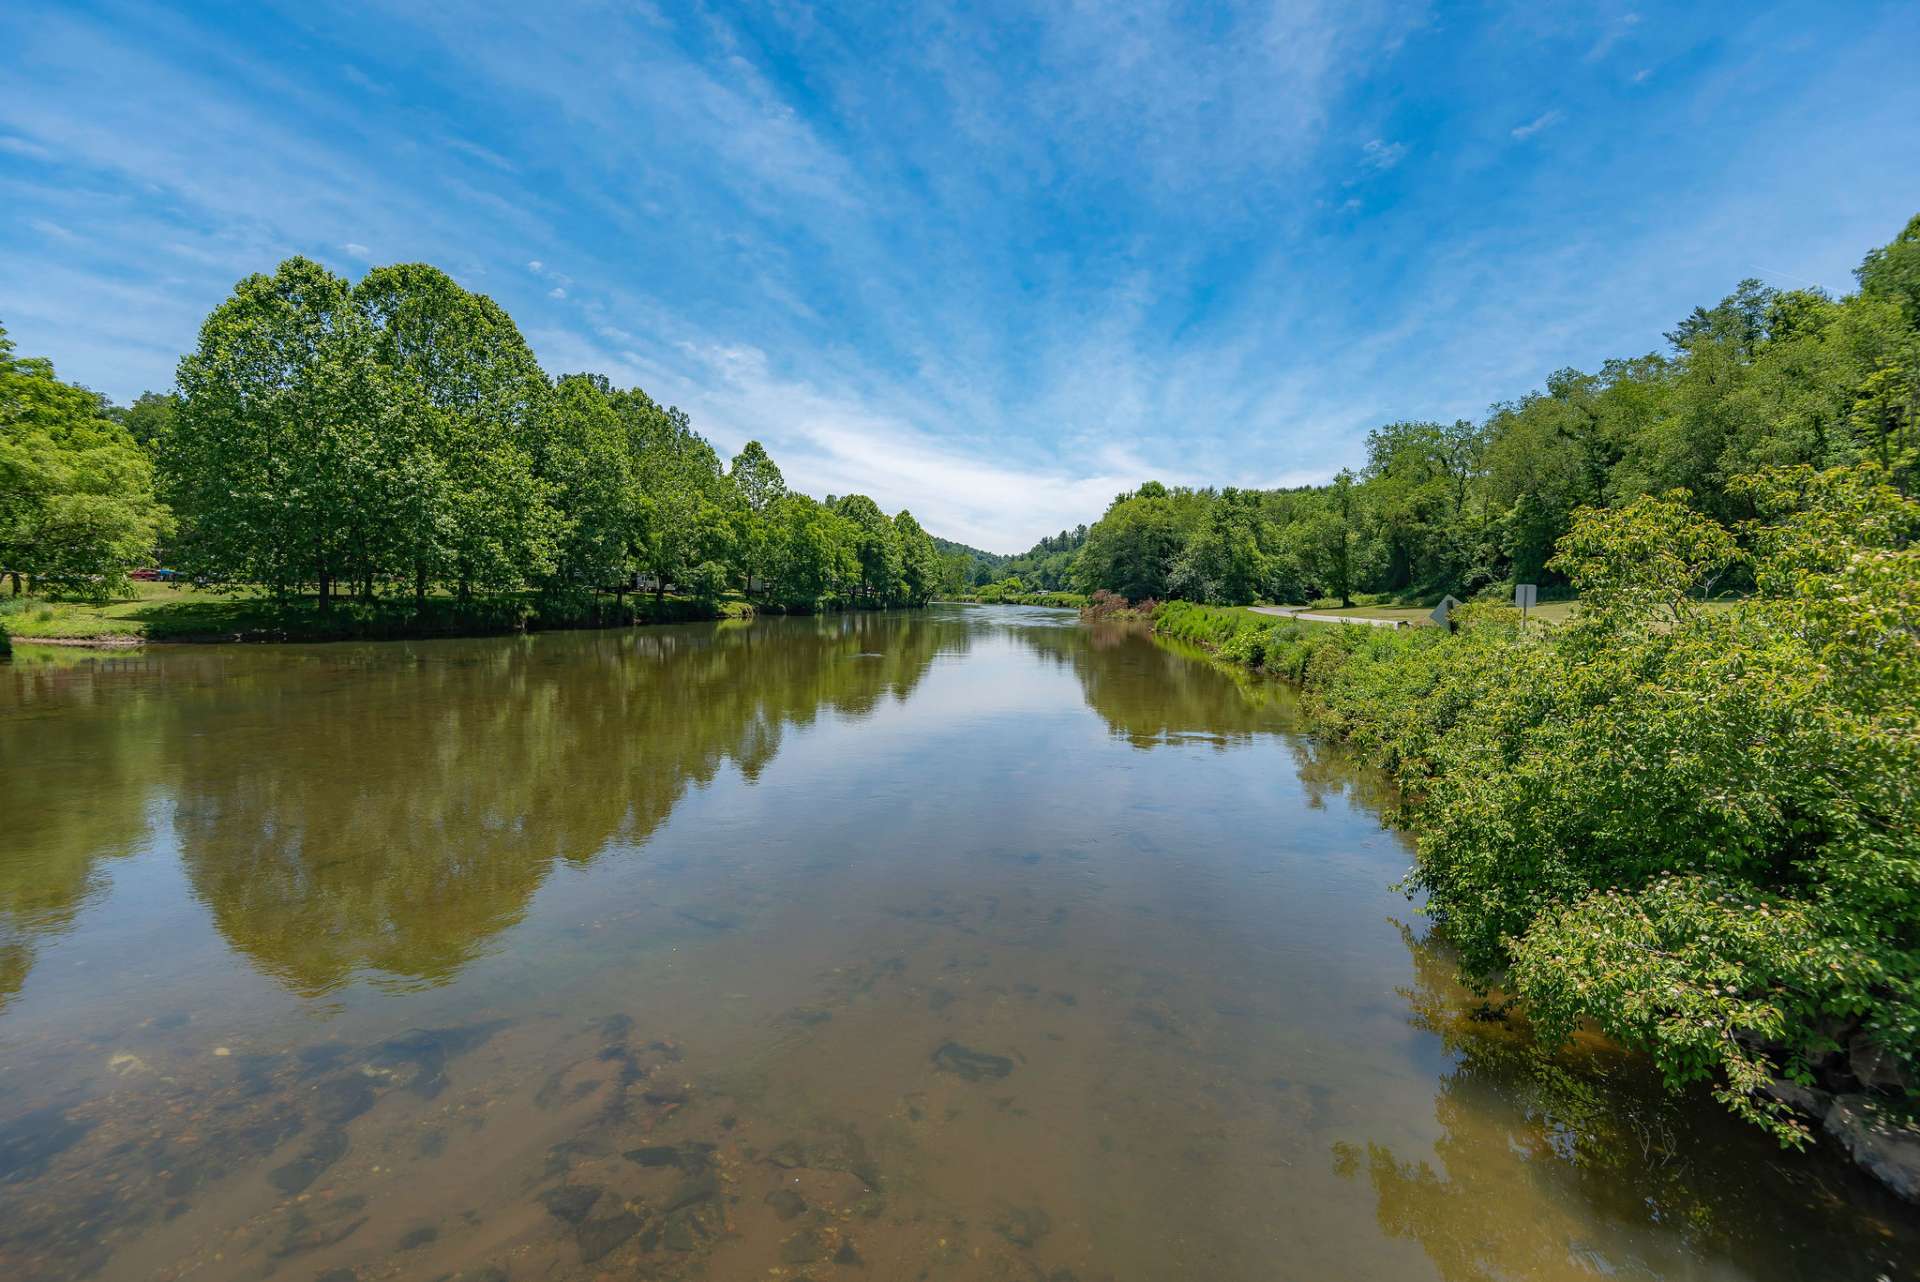 Enjoy a fun filled day on the New River which is just across the road. Easy public access to the water is less than a mile away from the property.  This photo taken at the Kings Creek Bridge and State Park access area by the bridge.